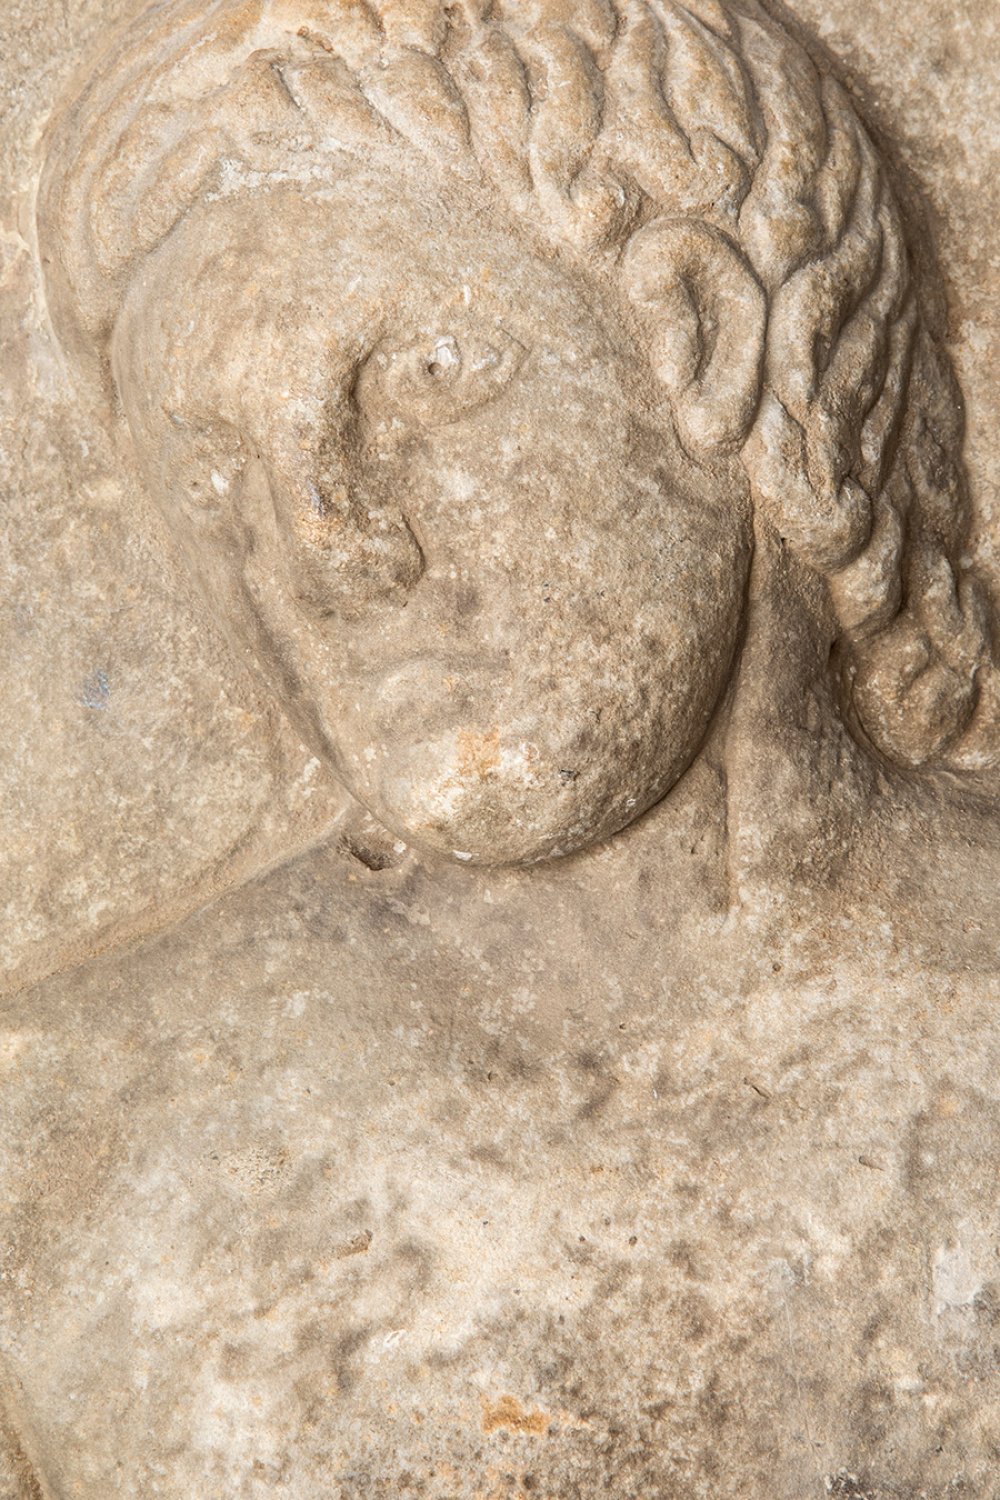 Greek relief, late Hellenistic or Roman, 1st c. BC - 2nd c. AD.Stone.Measurements: 71 x 31 x 8 cm. - Image 3 of 5